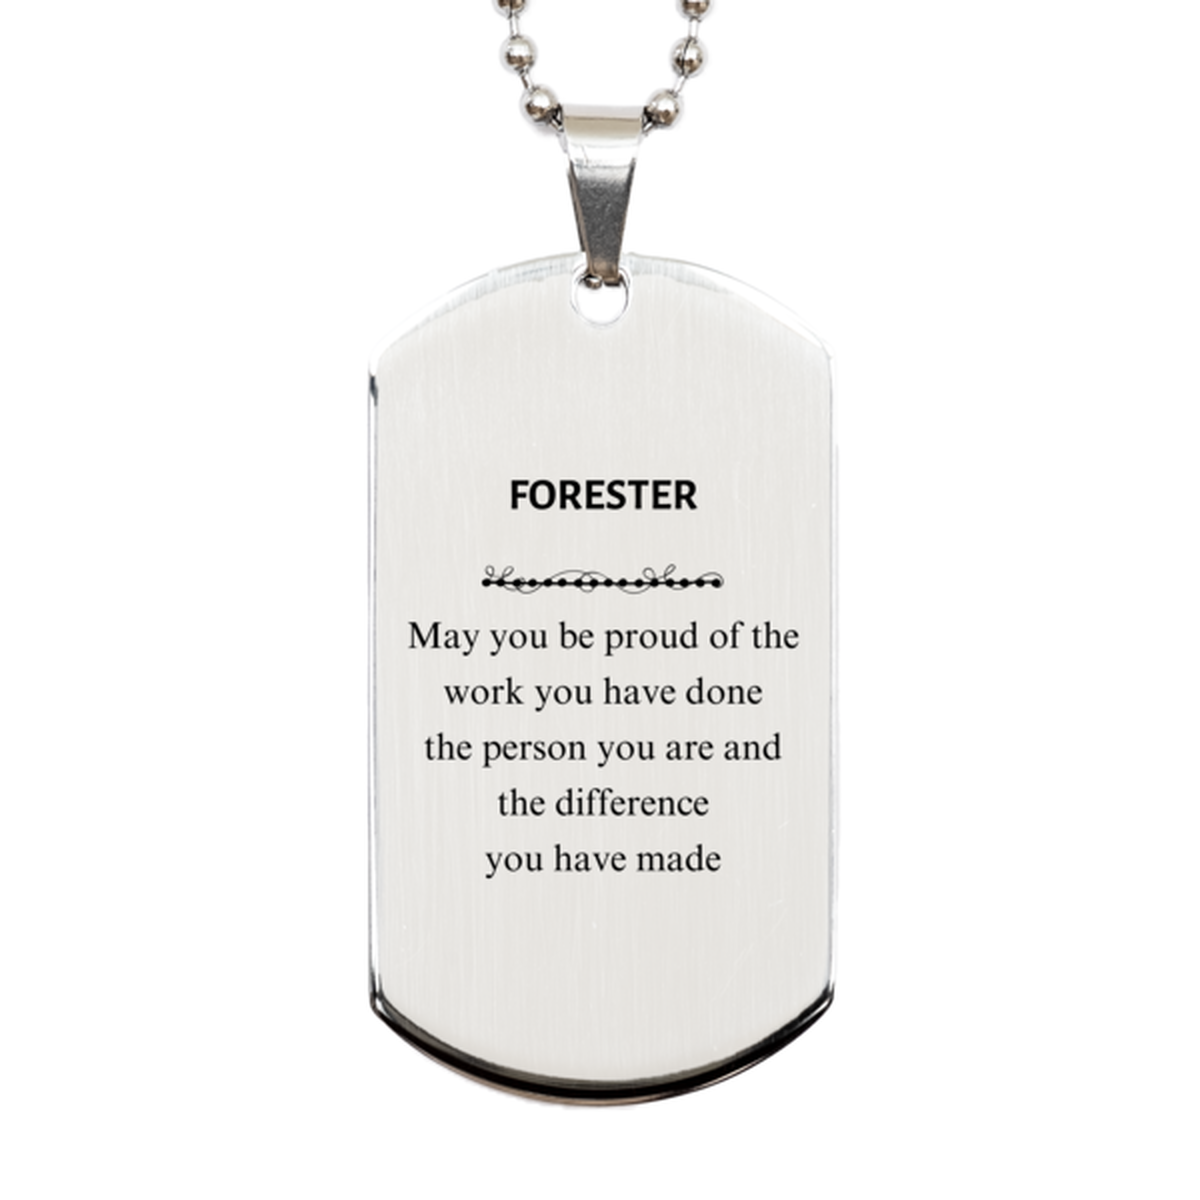 Forester May you be proud of the work you have done, Retirement Forester Silver Dog Tag for Colleague Appreciation Gifts Amazing for Forester